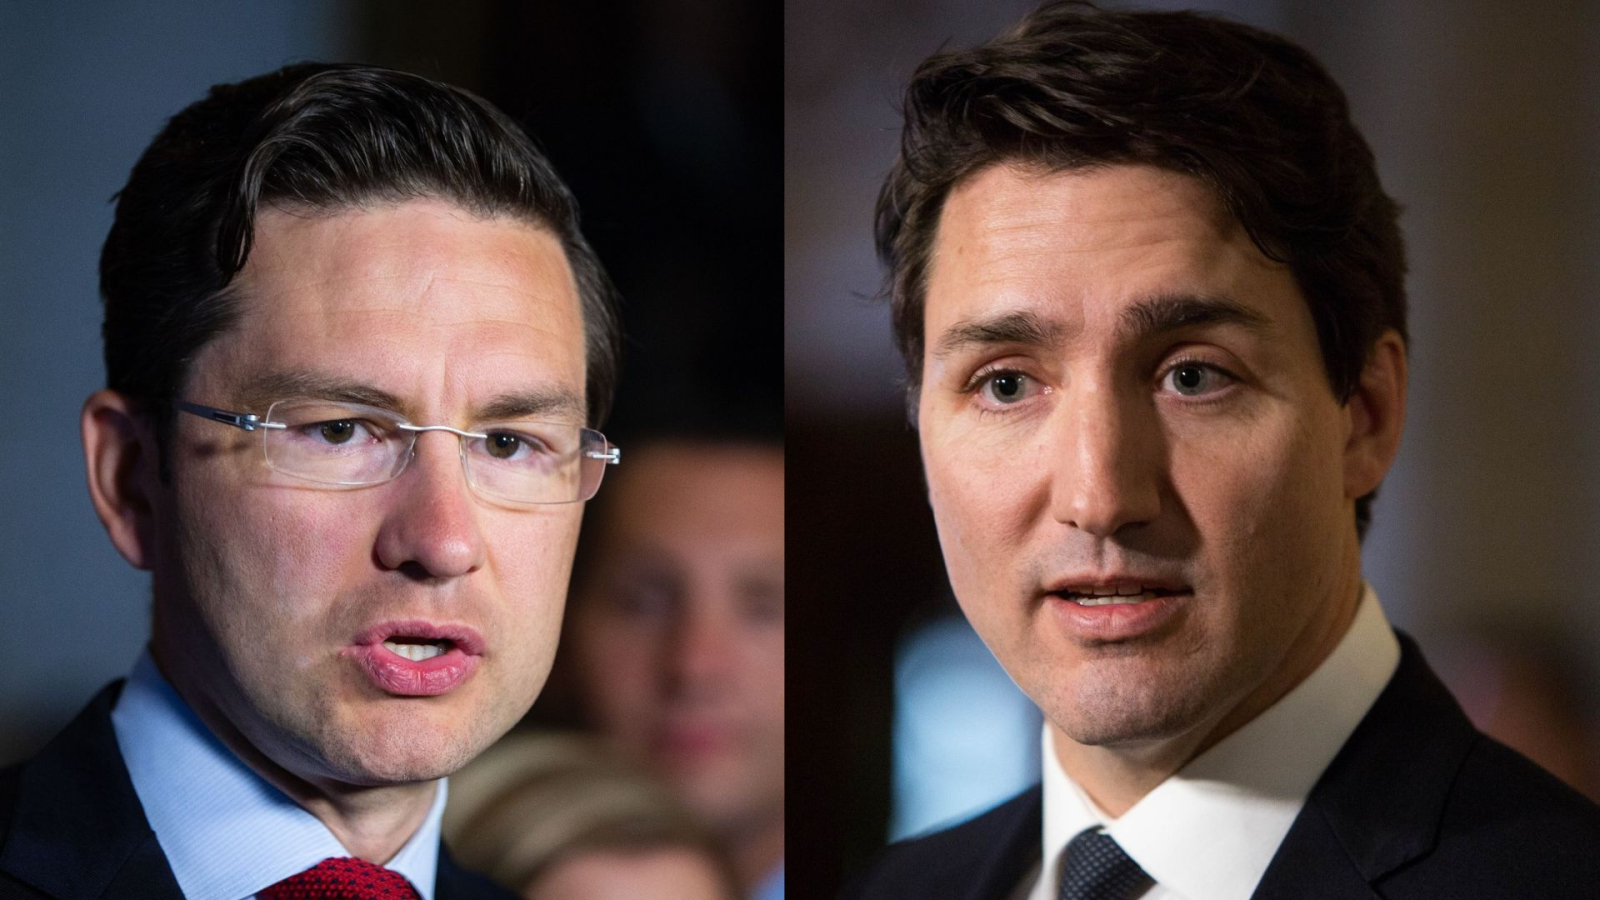 Headshot of Pierre Poilievre on left and headshot of Justin Trudeau on the right